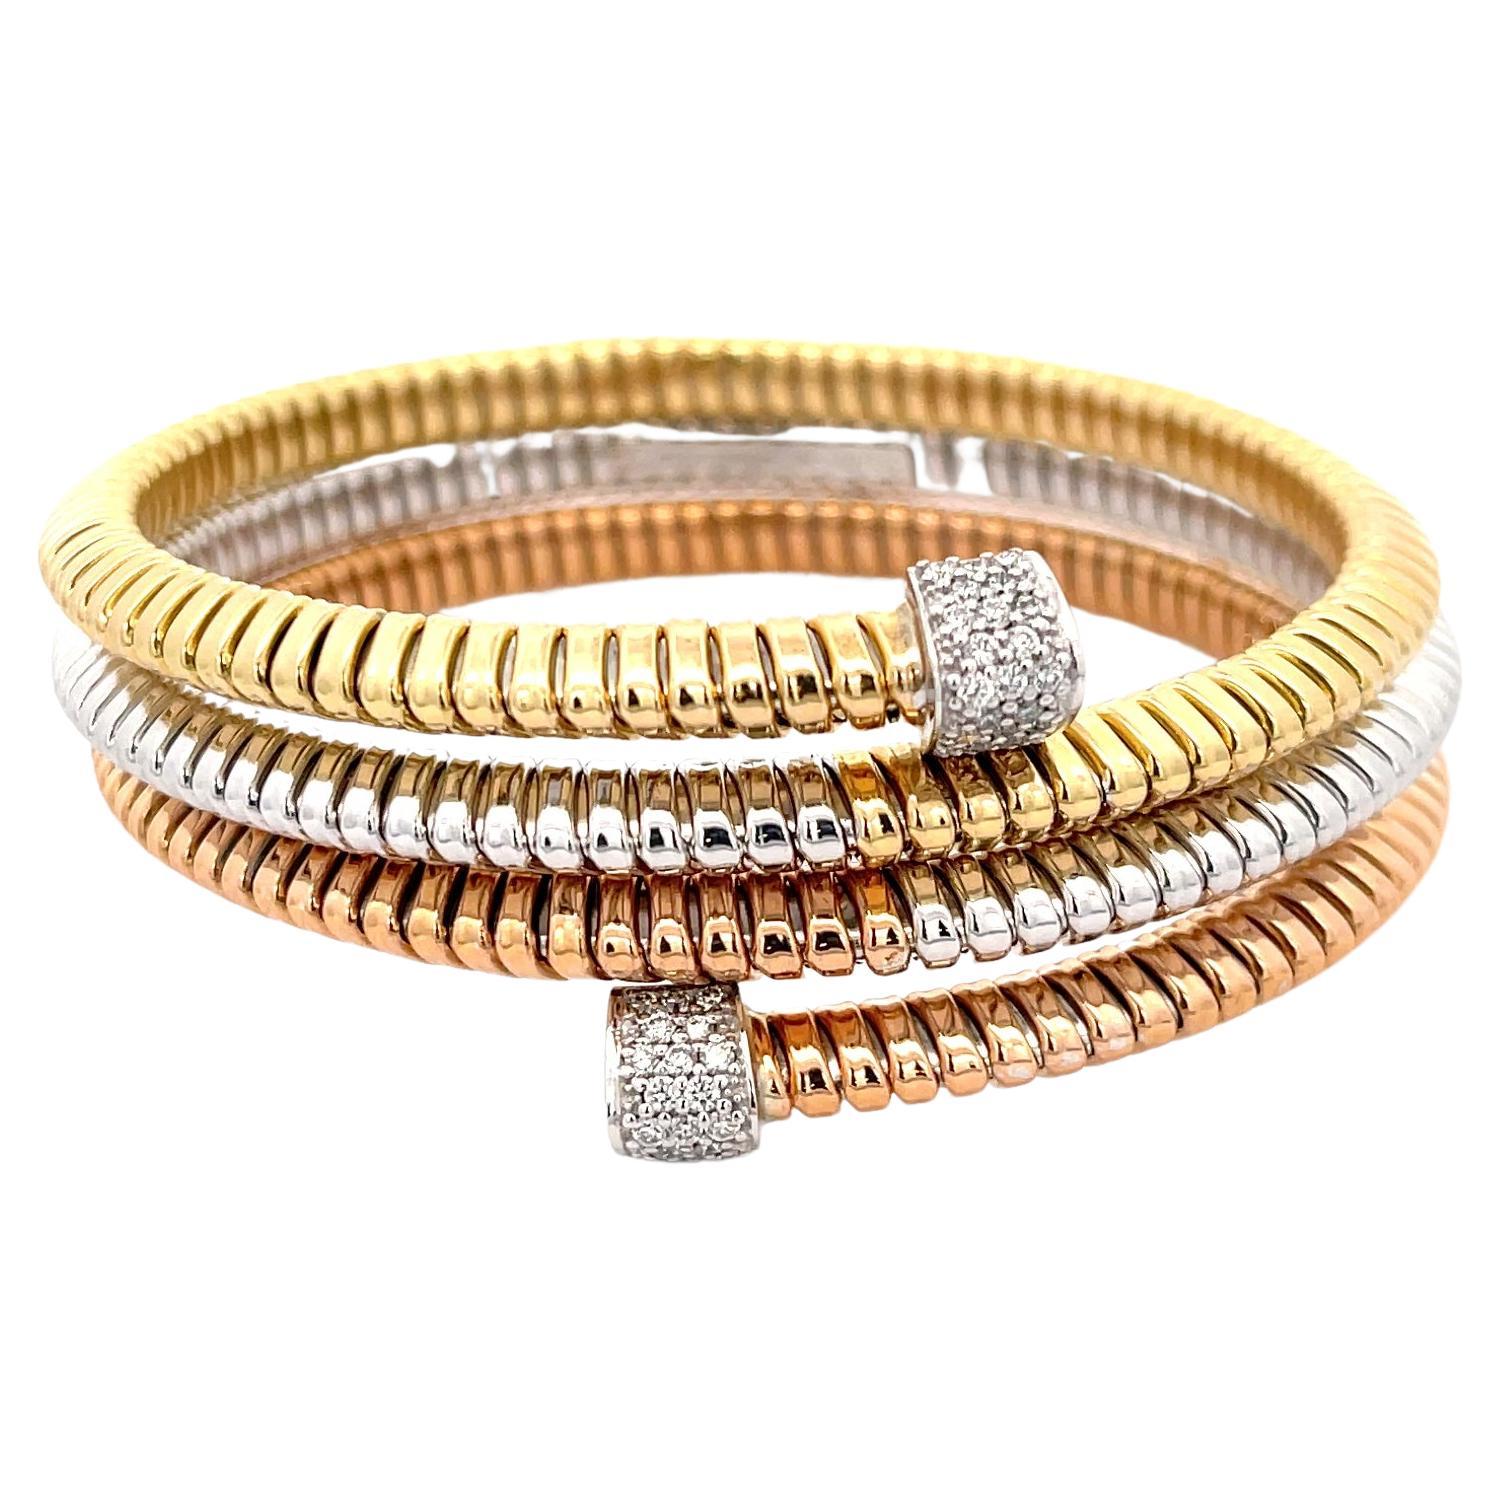 Tessitore Tri-Gold Cable Wrap Bracelet in 18K Gold